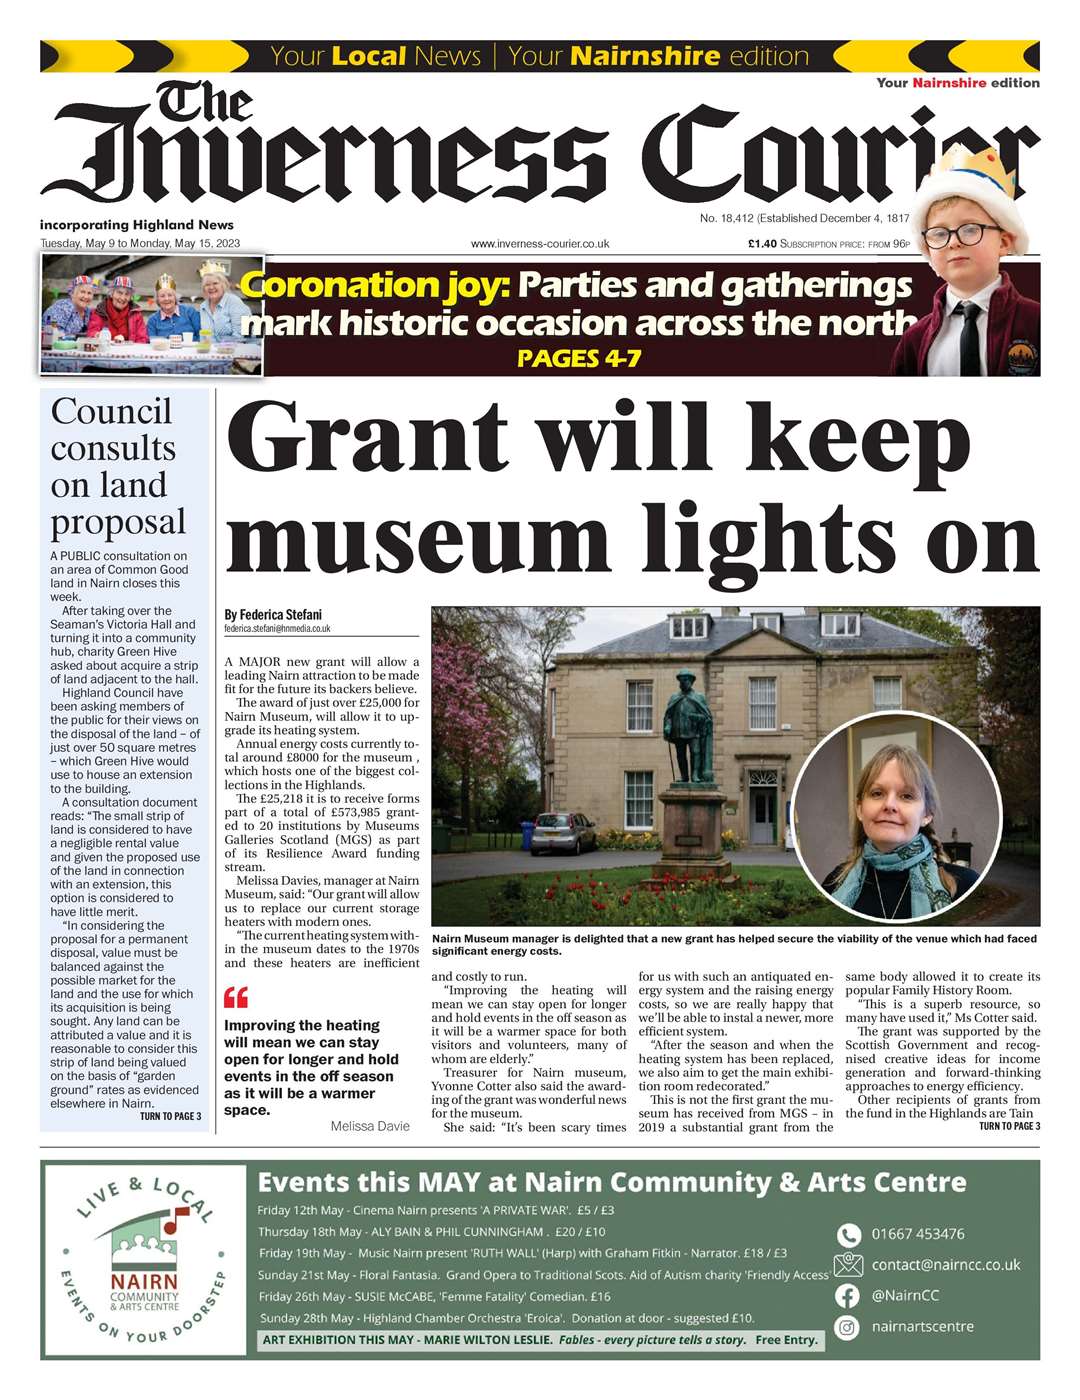 The Inverness Courier (Nairnshire edition), May 9, front page.